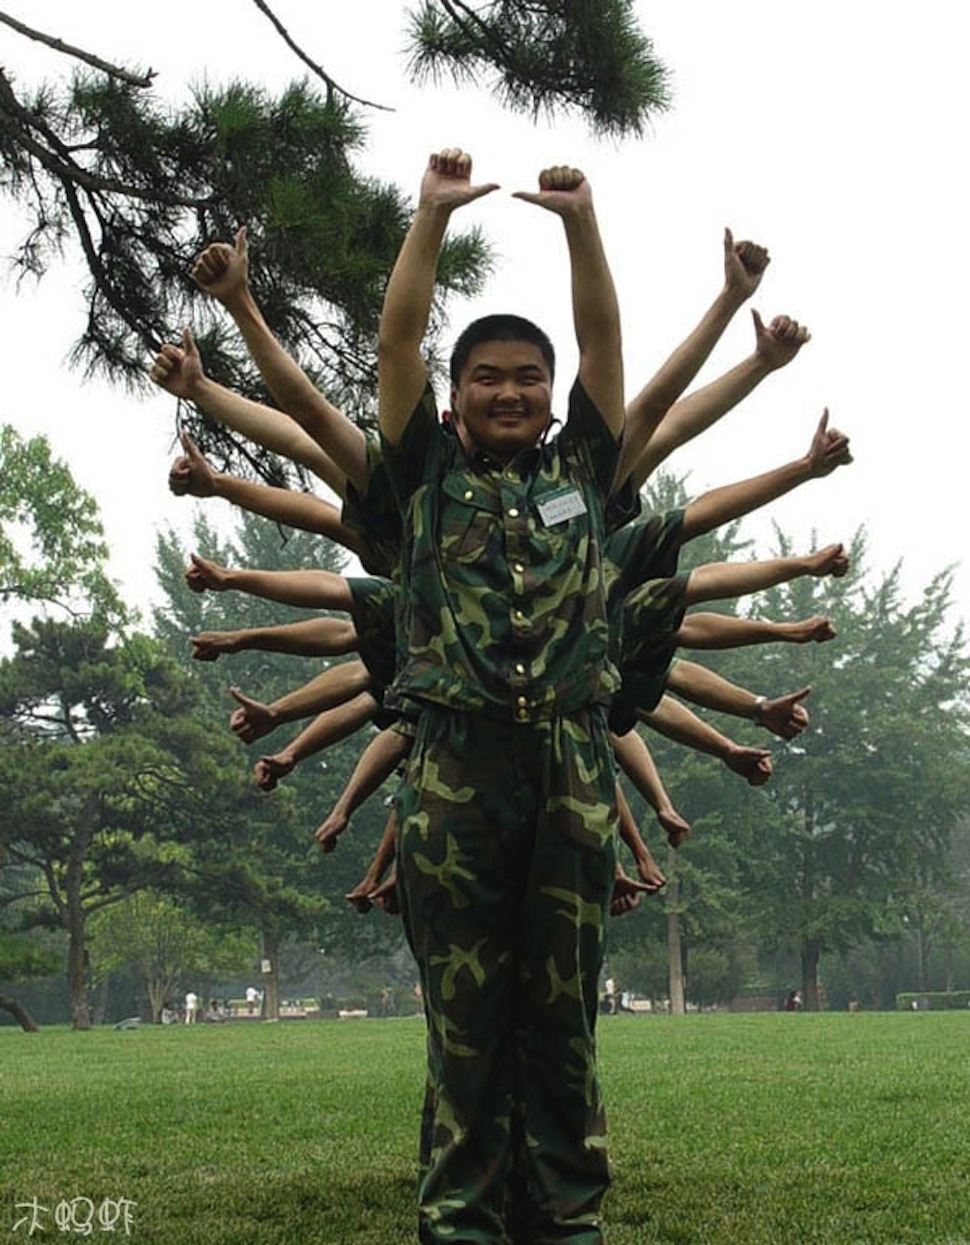 The Lighter Side Of China’s Compulsory Military Training